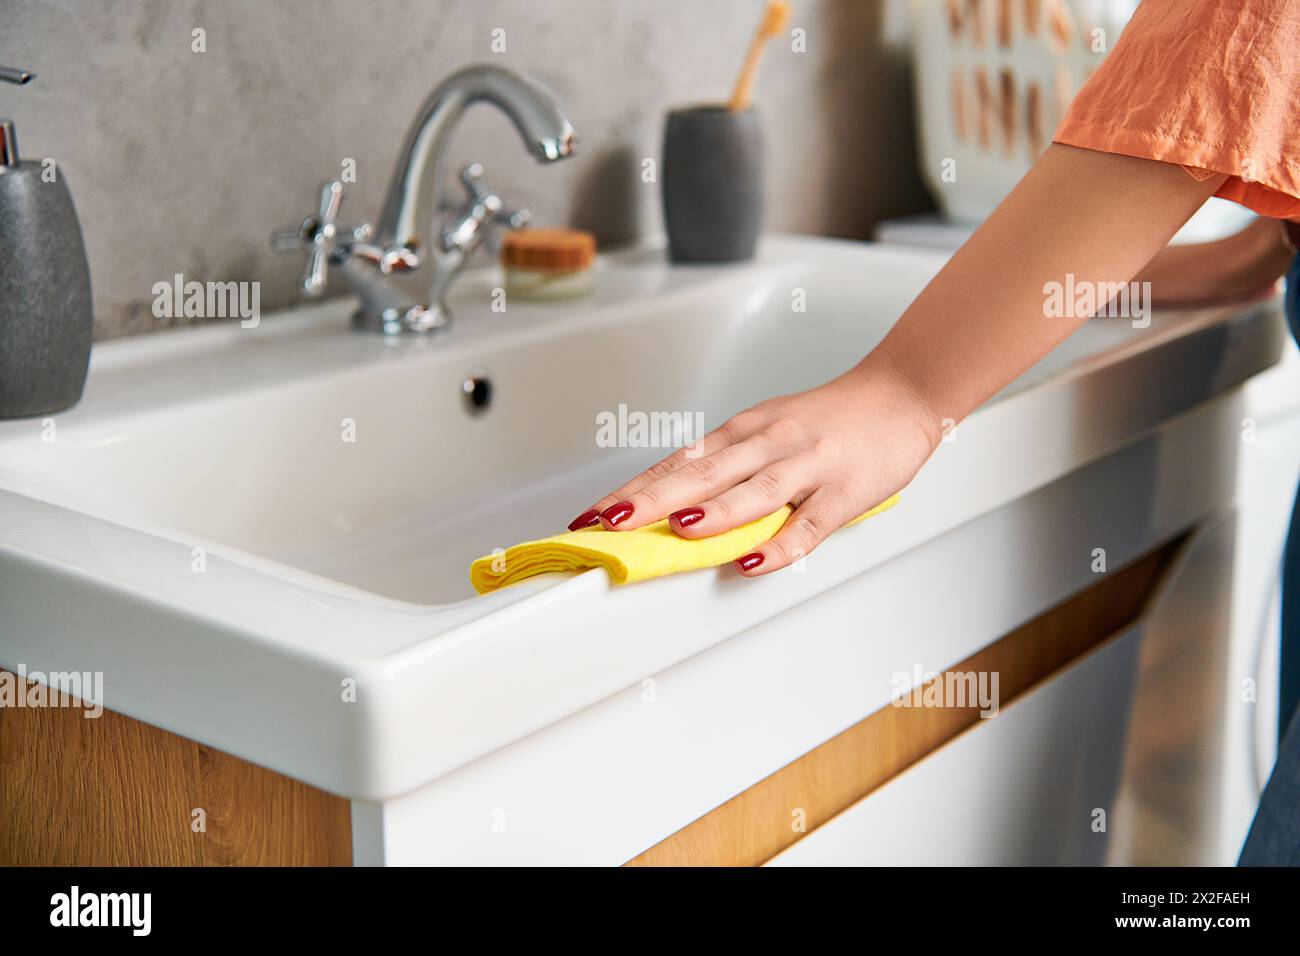 A stylish woman in casual attire diligently scrubs a sink with a bright yellow sponge to remove dirt and achieve a spotless shine. Stock Photo